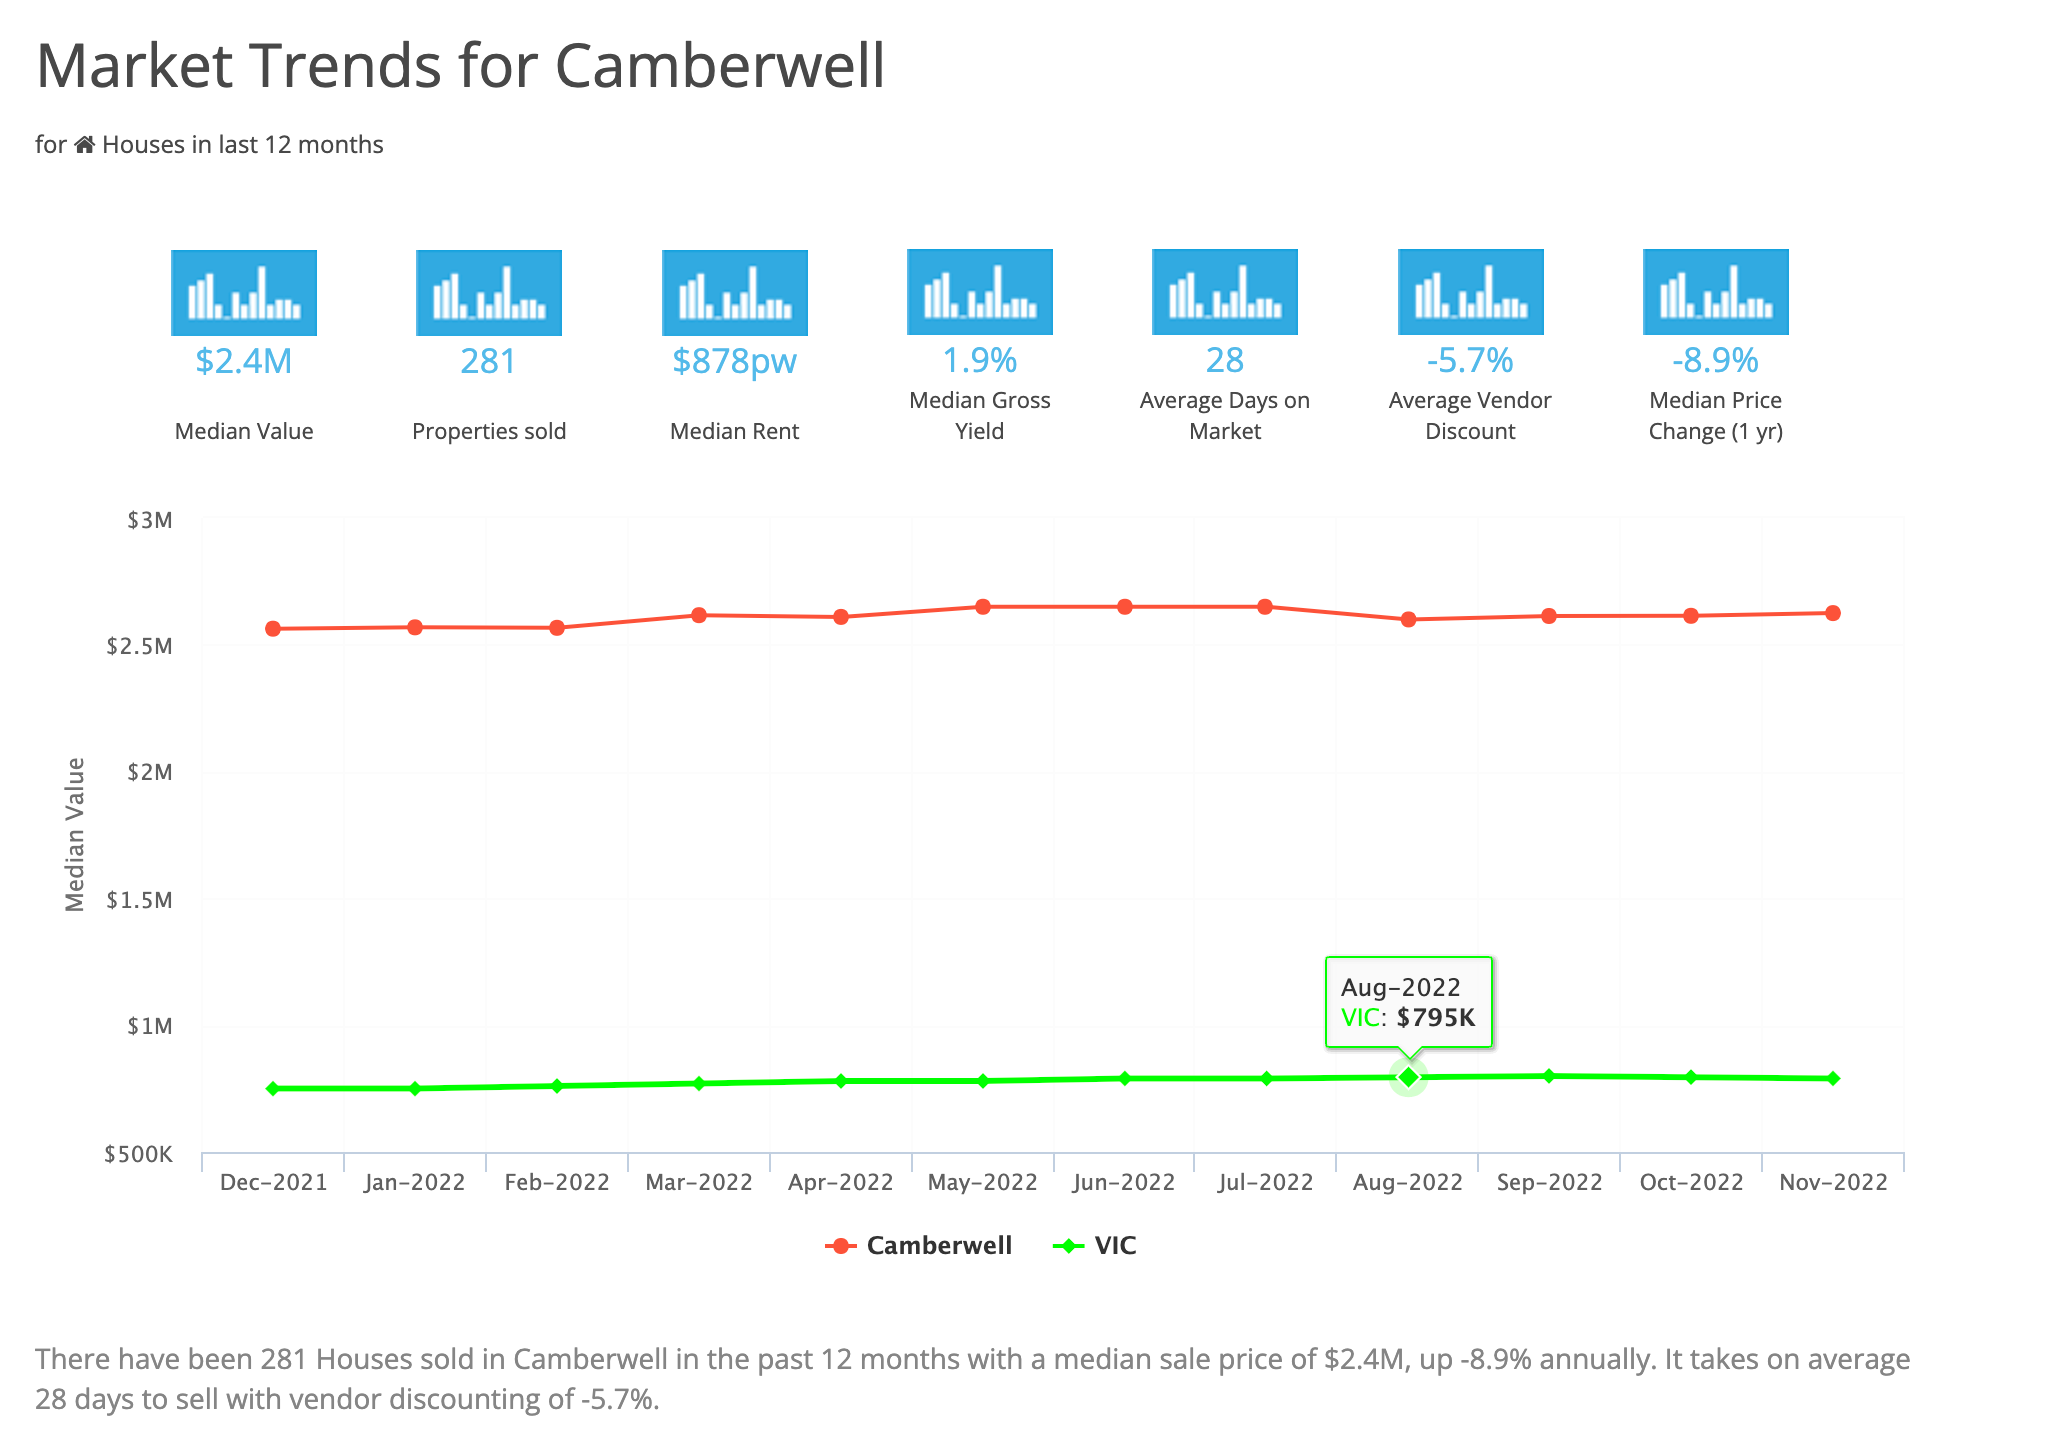 Market Trends for Camberwell March 2023